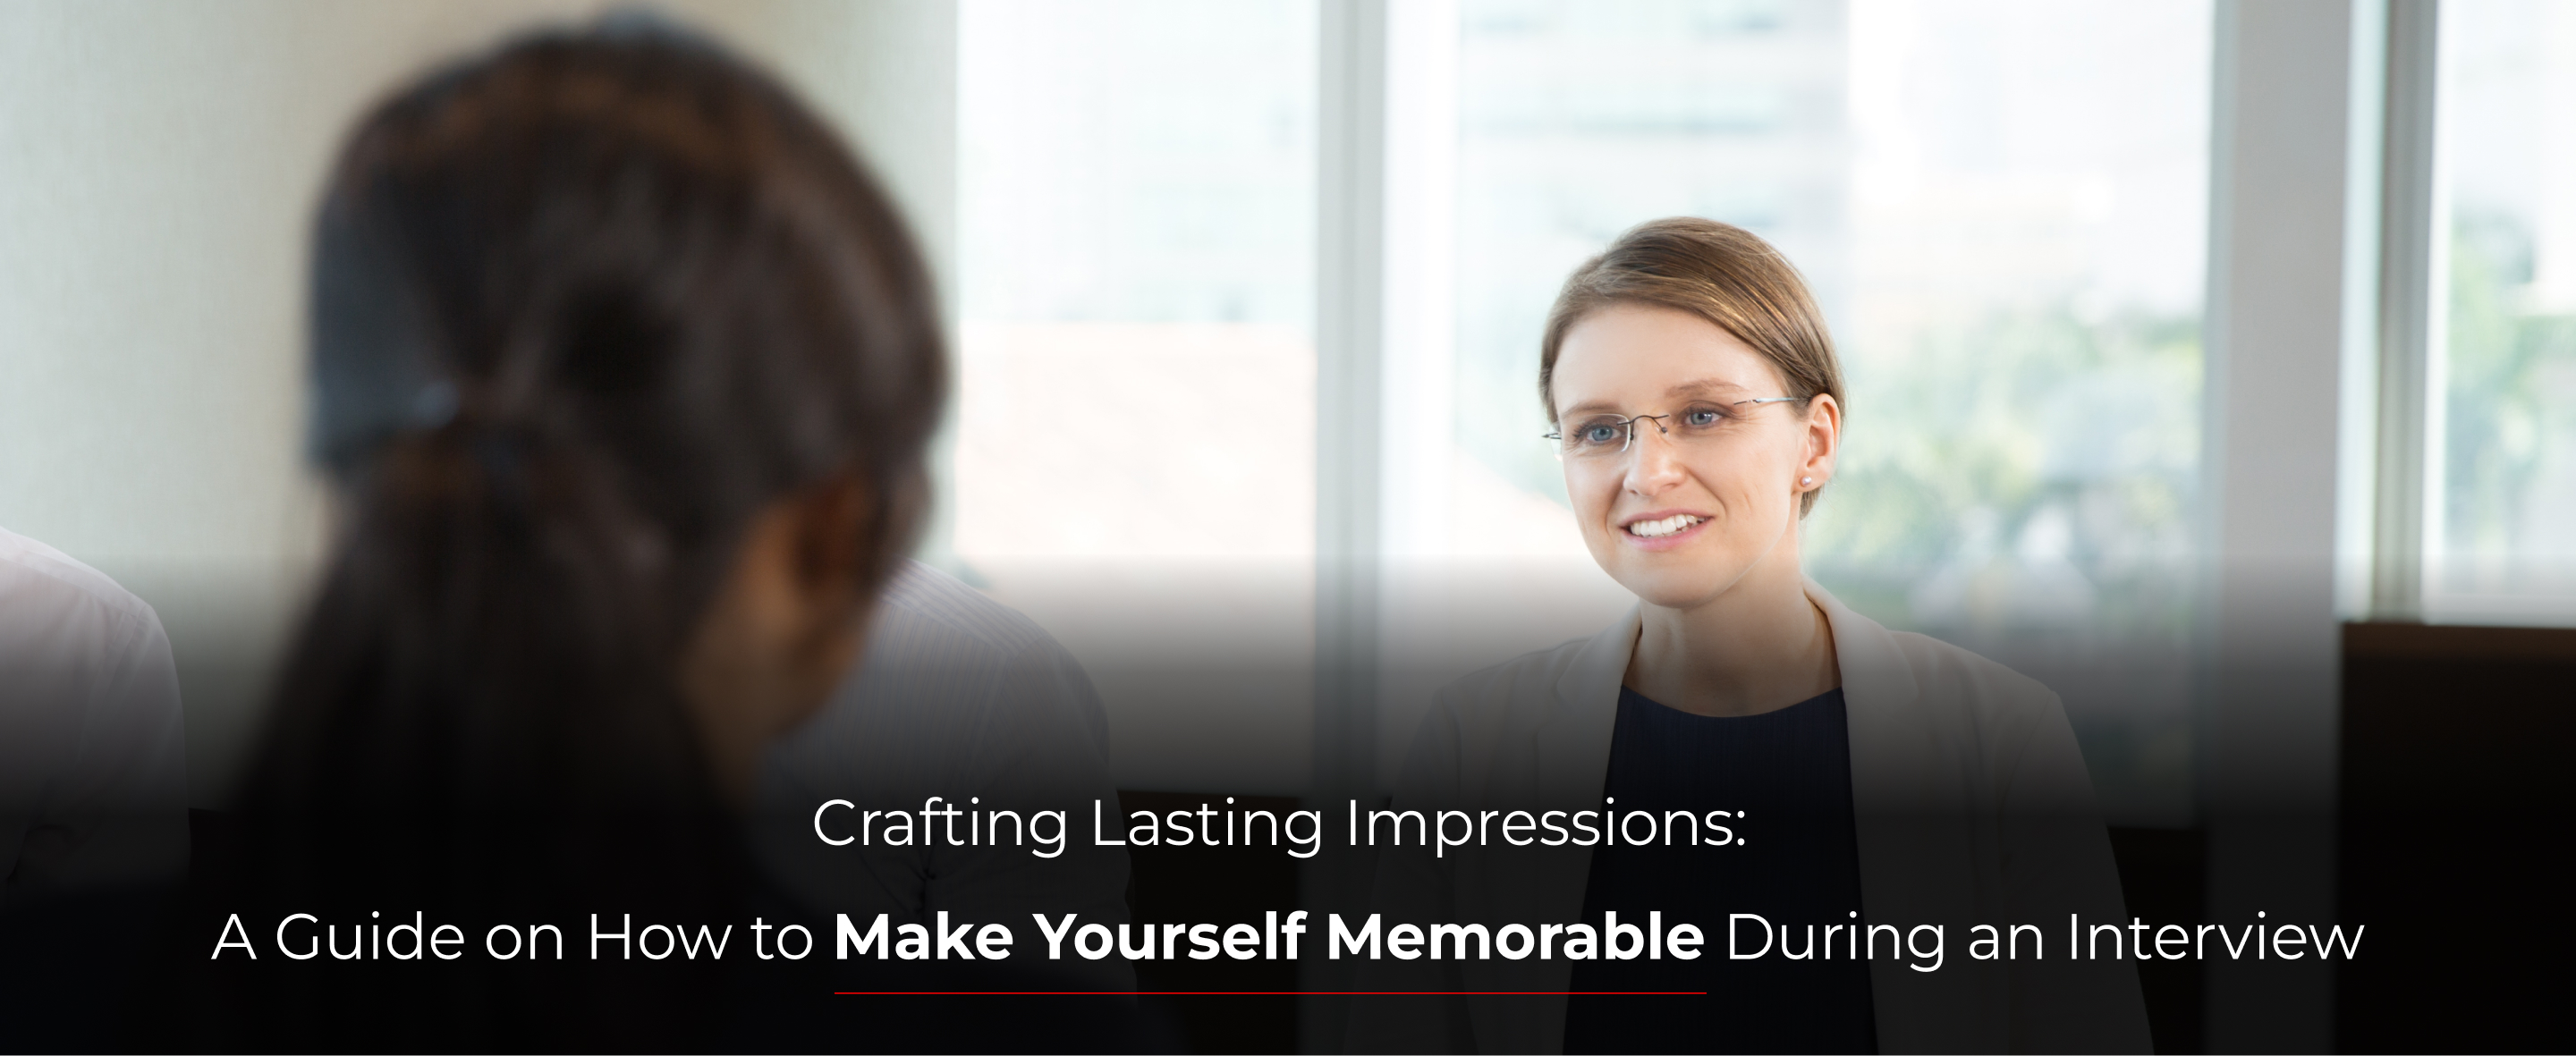 Crafting Lasting Impressions: A Guide on How to Make Yourself Memorable During an Interview